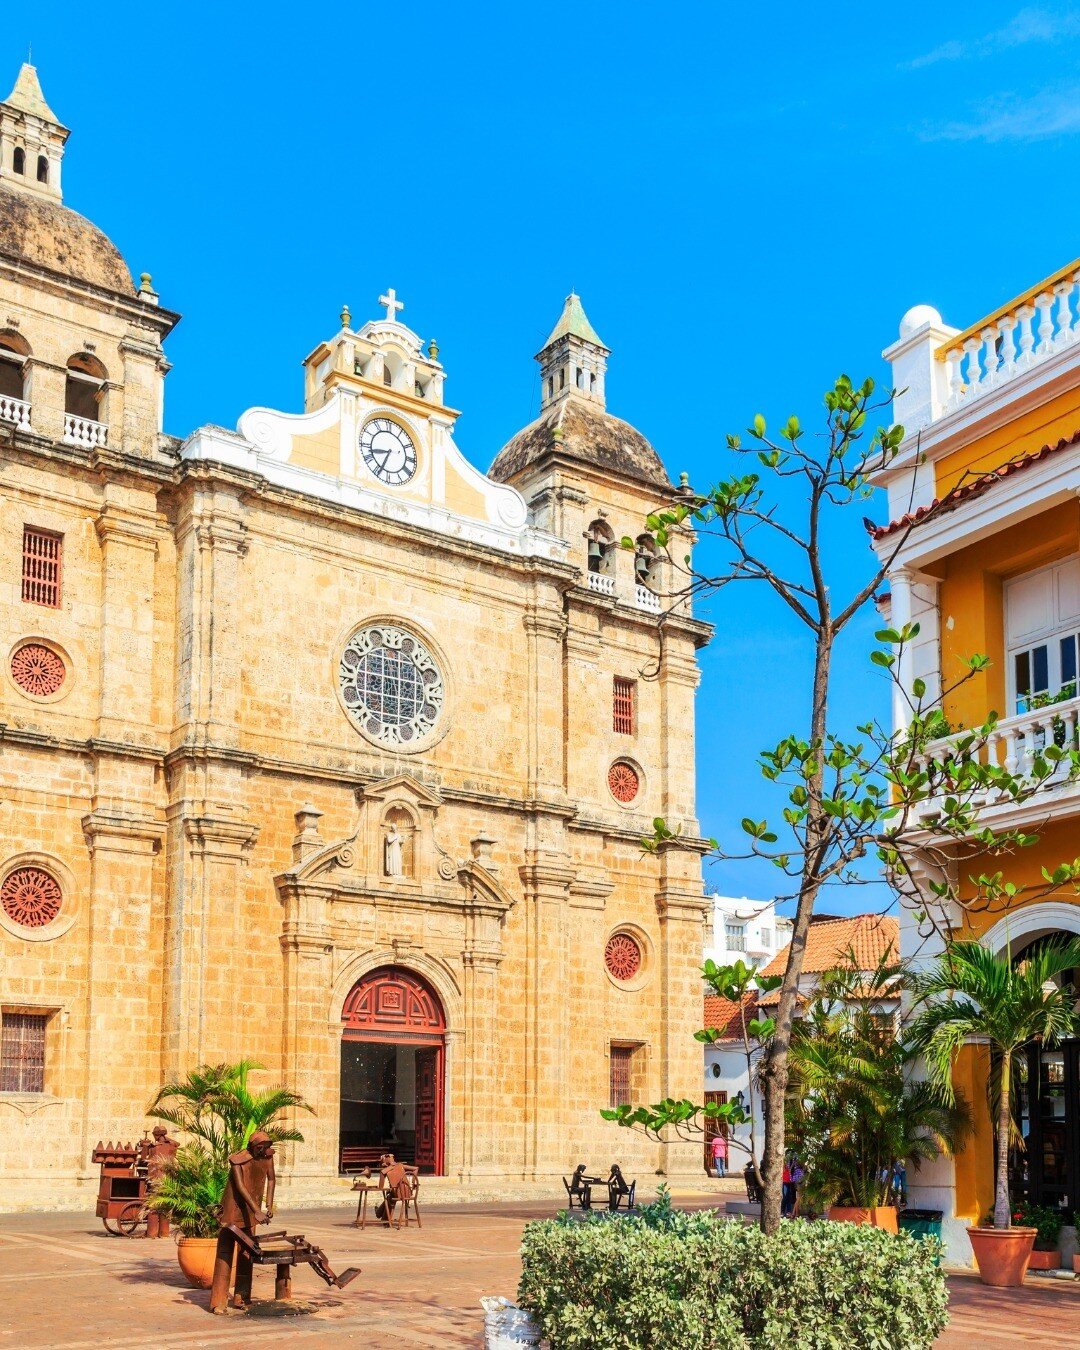 Picture perfect with beautiful, bright colored buildings, historic landmarks, and Caribbean beaches all in one place! Visit Cartagena to be part of the experience and don&rsquo;t forget to stay with us! 😎

Book now: https://airbnb.com/h/casa-cartage